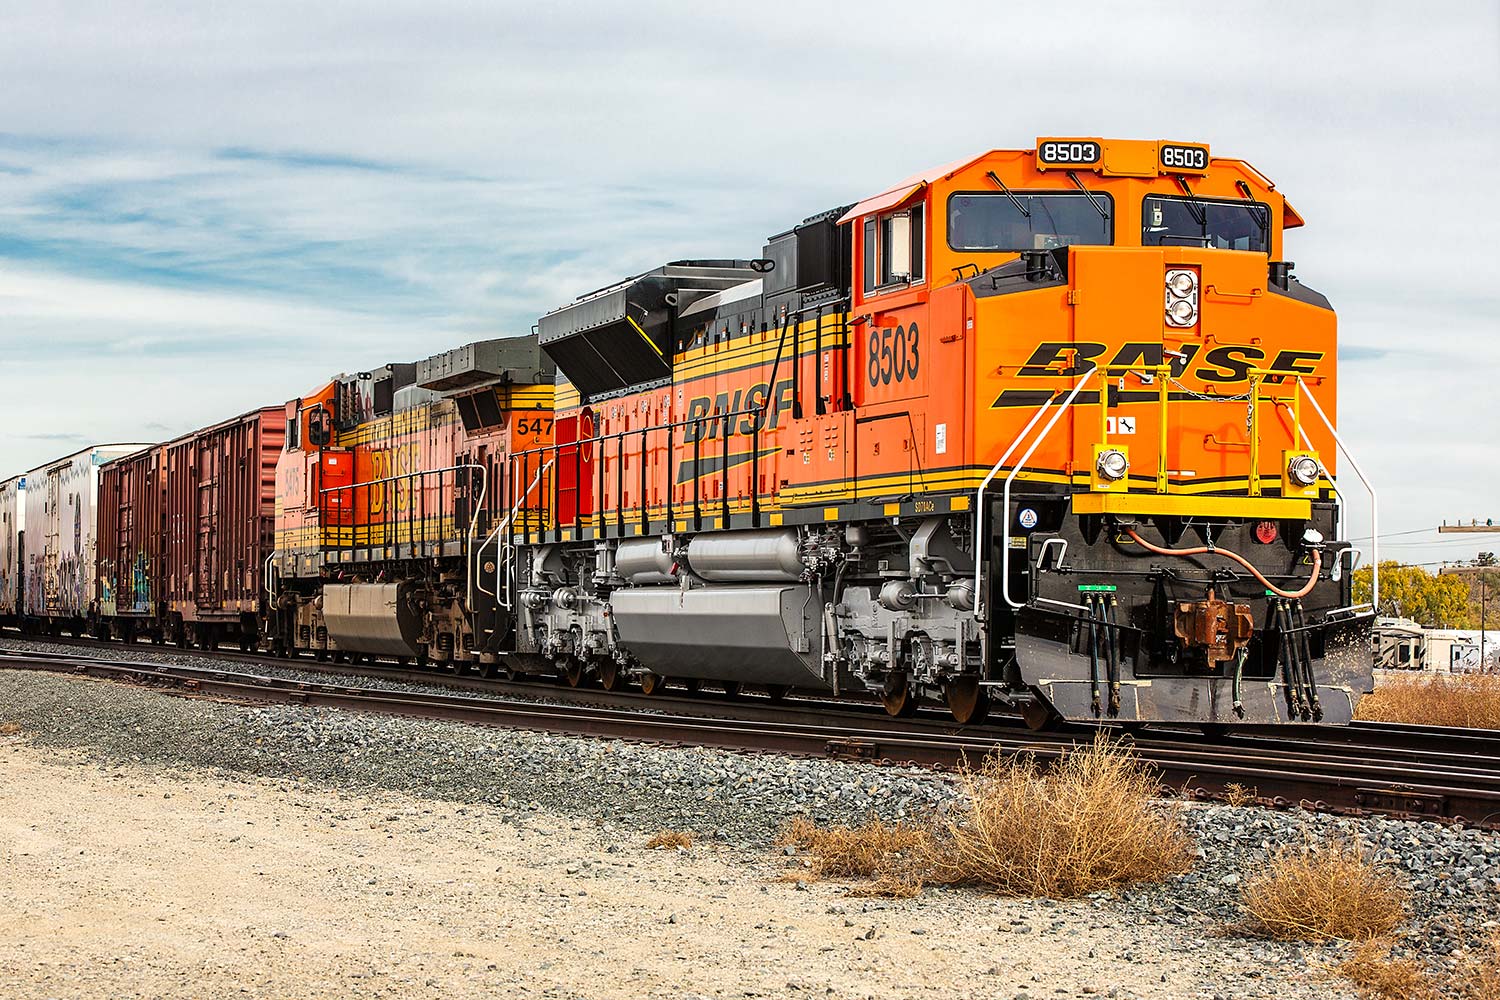 A BNSF Railways locomotive chugs on through the industrial district in Billings, Montana.